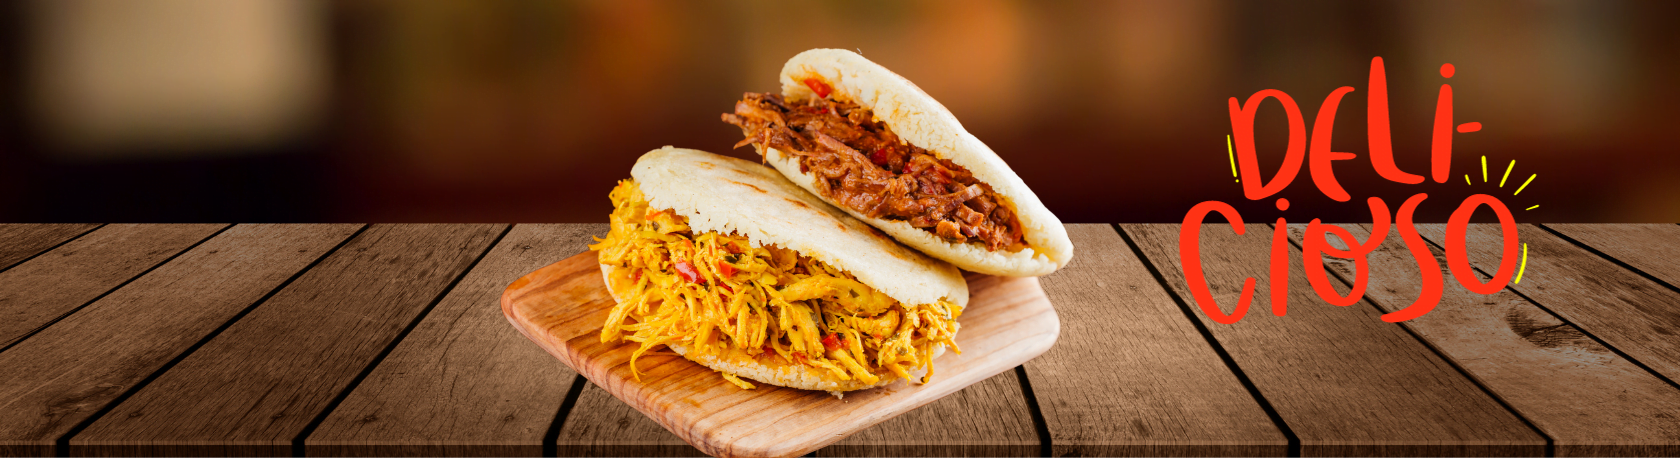 Flex your Spanish vocabulary muscles and learn the fascinating history of las arepas - Speak Spanish - Spanish Listening - Spanish Podcast - Learn Spanish - Study Spanish - Easy Español